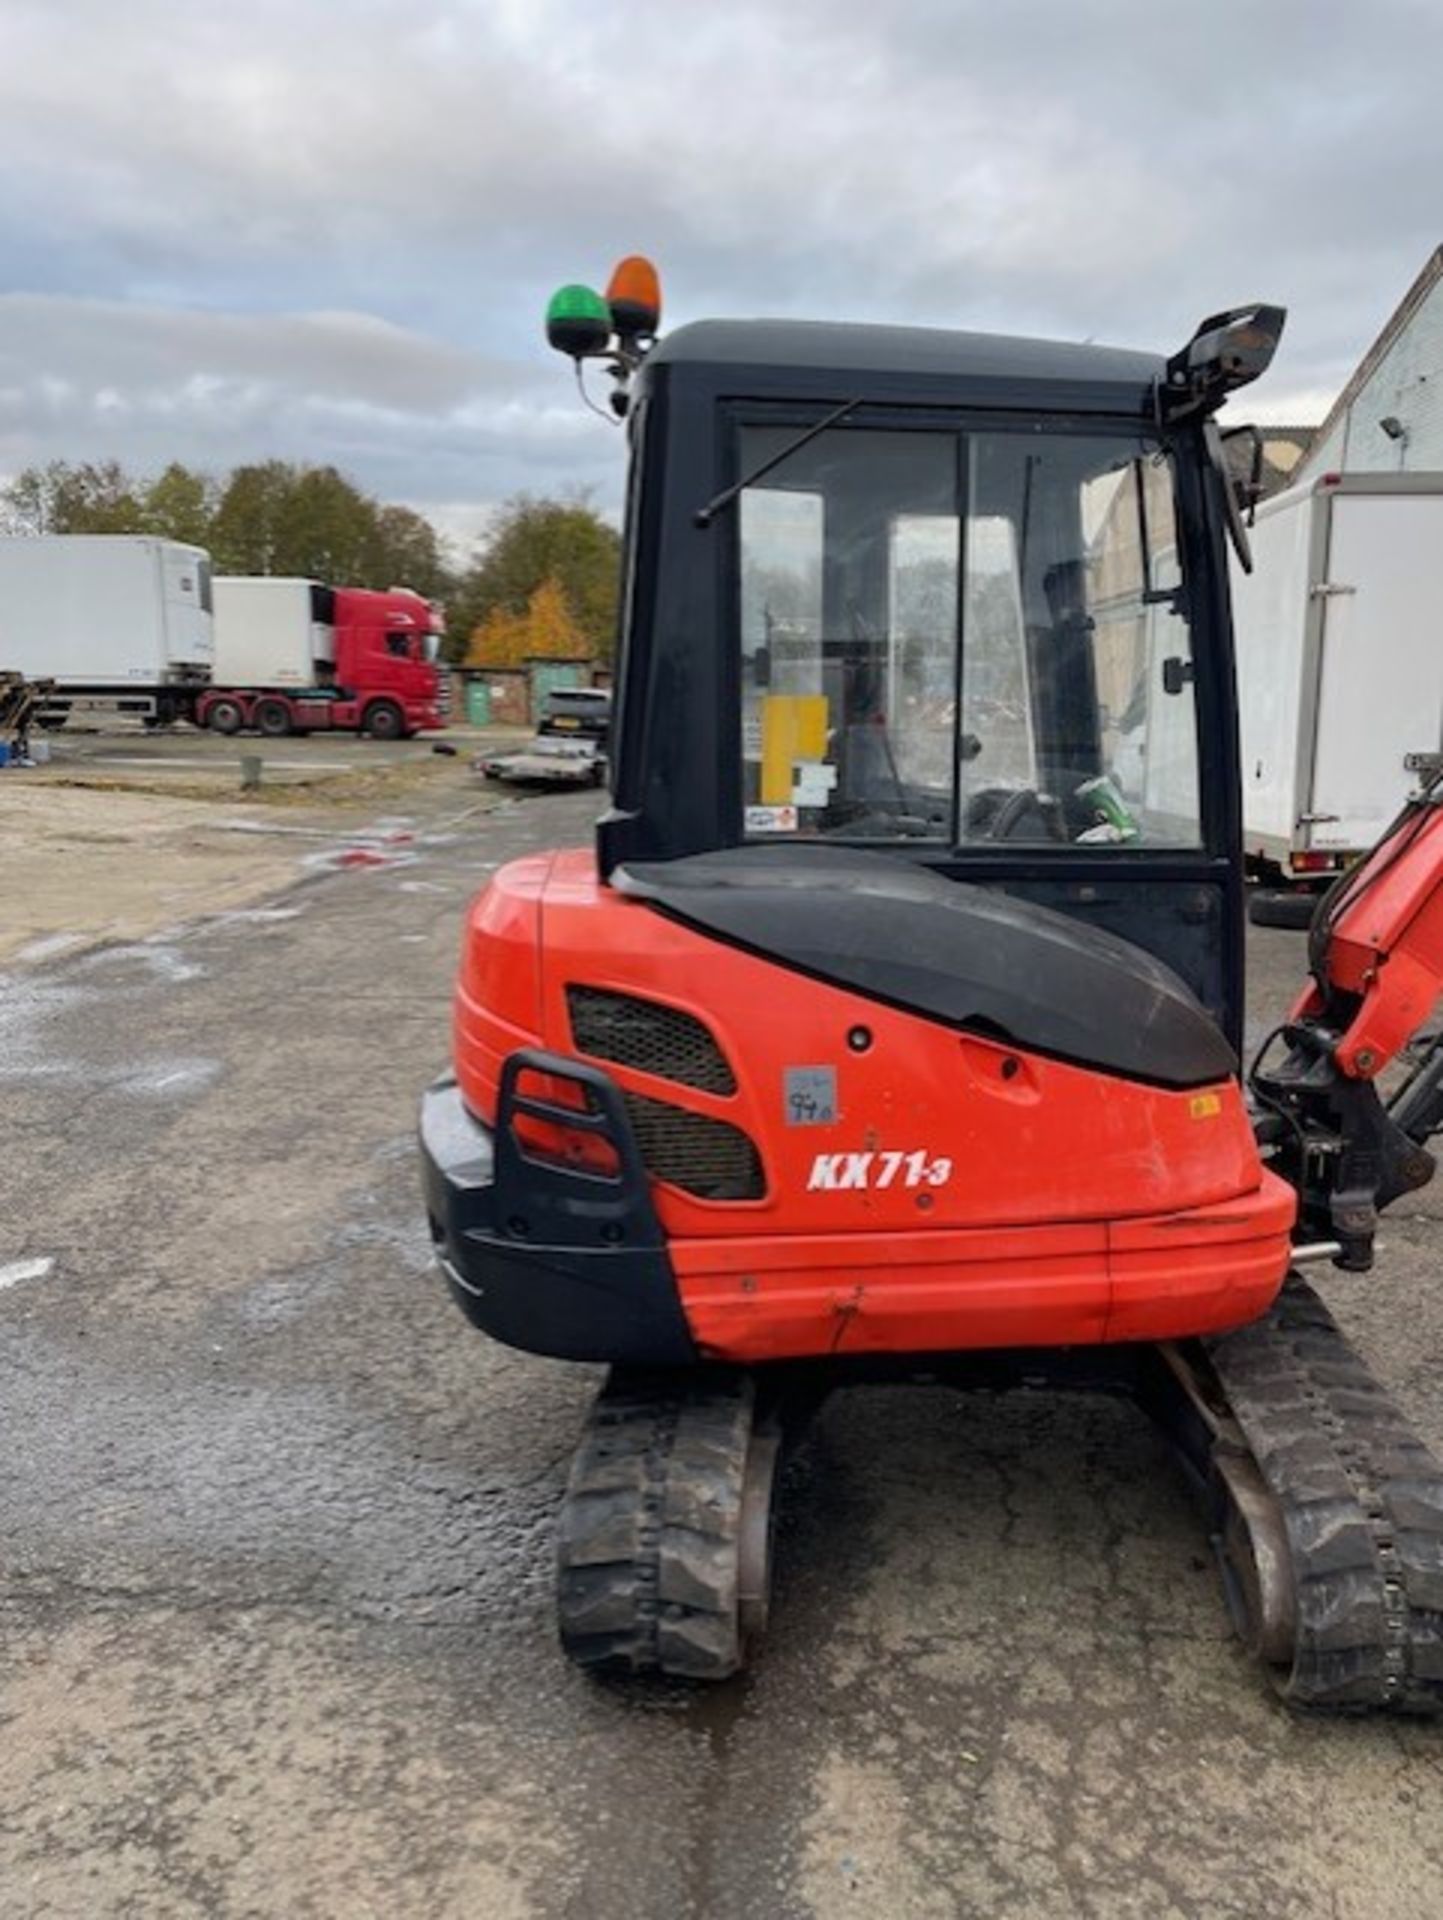 Kubota kx71  3 ton excavator 2015 in very decent condition all working always serviced 3k plus hours - Image 4 of 9